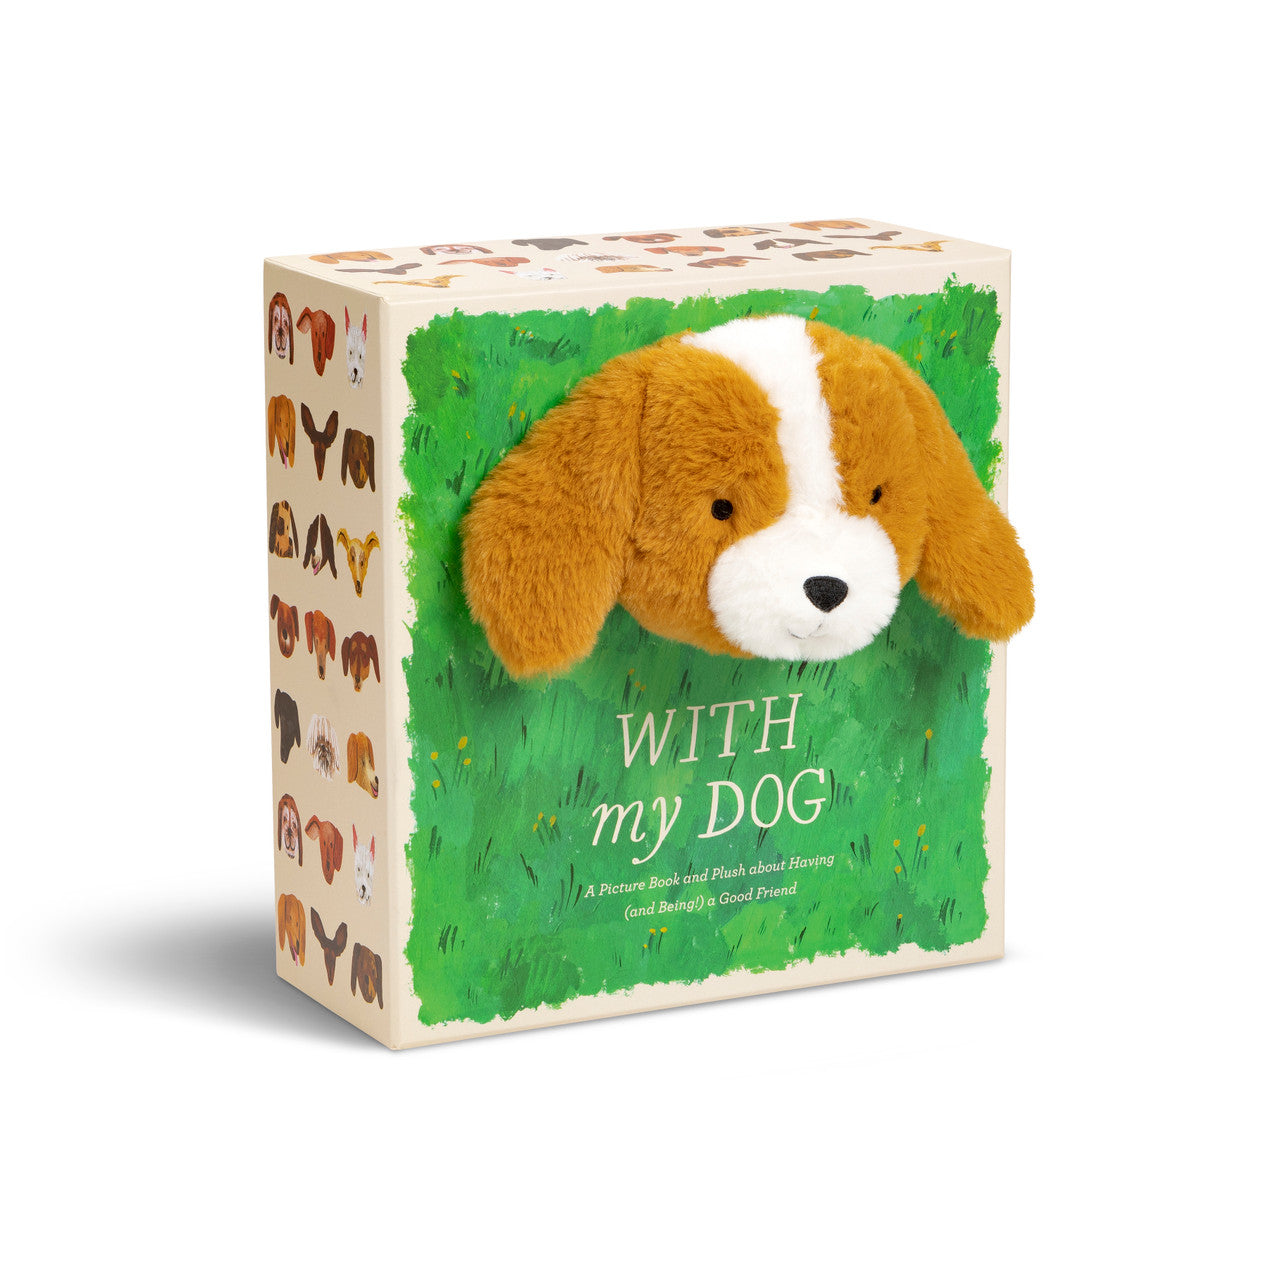 With My Dog Book & Plush Gift Set